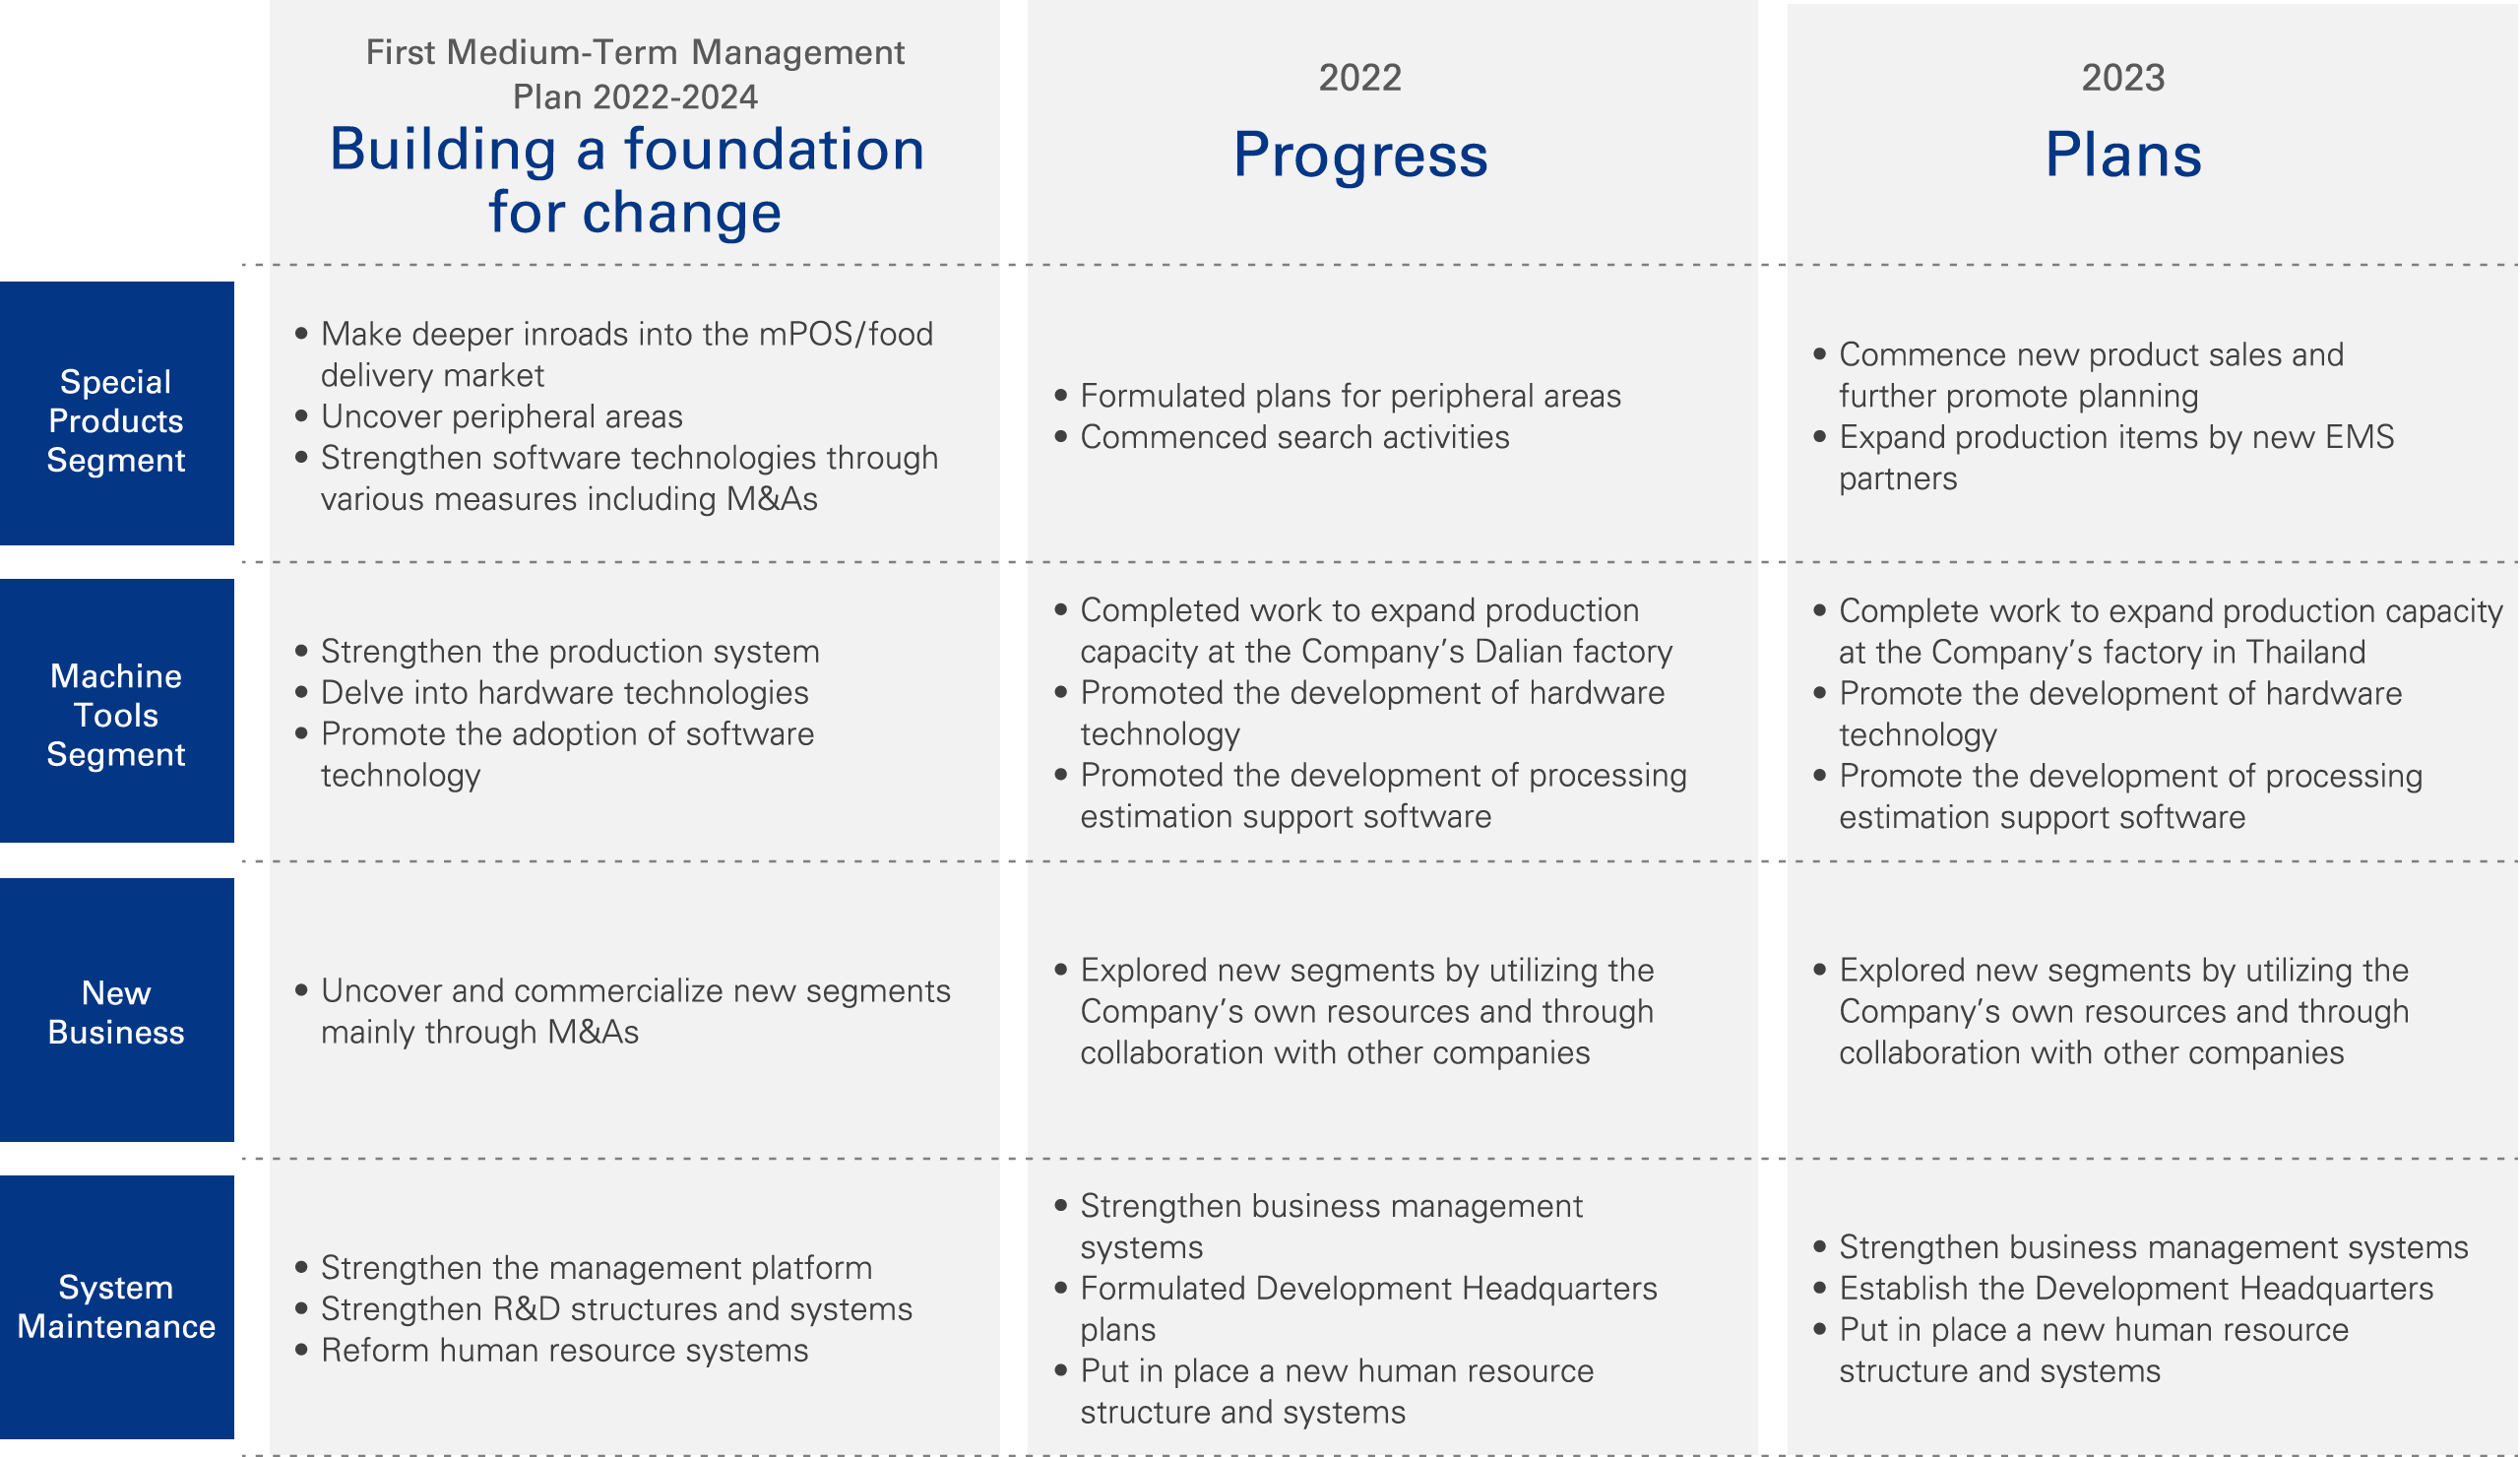 Progress of “Building a Foundation for Change”